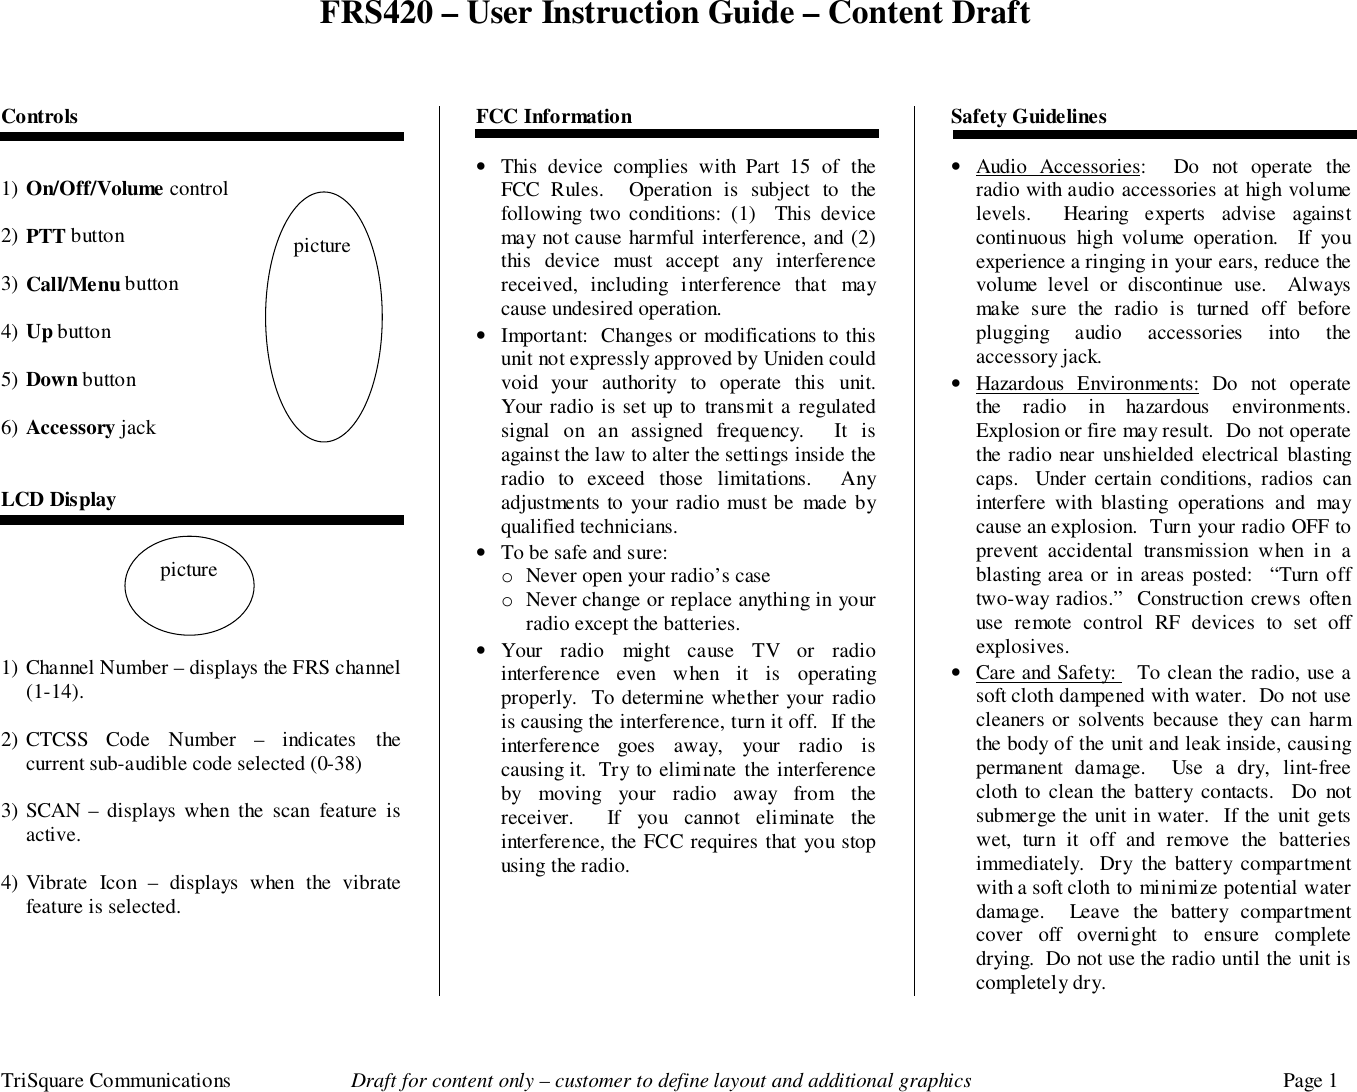 FRS420 – User Instruction Guide – Content DraftTriSquare Communications Draft for content only – customer to define layout and additional graphics Page 1Controls1) On/Off/Volume control 2) PTT button3) Call/Menu button4) Up button5) Down button6) Accessory jackLCD Display1) Channel Number – displays the FRS channel(1-14).2) CTCSS Code Number – indicates thecurrent sub-audible code selected (0-38)3) SCAN – displays when the scan feature isactive.4) Vibrate Icon – displays when the vibratefeature is selected.FCC Information• This device complies with Part 15 of theFCC Rules.  Operation is subject to thefollowing two conditions: (1)  This devicemay not cause harmful interference, and (2)this device must accept any interferencereceived, including interference that maycause undesired operation.• Important:  Changes or modifications to thisunit not expressly approved by Uniden couldvoid your authority to operate this unit.Your radio is set up to transmit a regulatedsignal on an assigned frequency.  It isagainst the law to alter the settings inside theradio to exceed those limitations.  Anyadjustments to your radio must be made byqualified technicians.• To be safe and sure:o Never open your radio’s caseo Never change or replace anything in yourradio except the batteries.• Your radio might cause TV or radiointerference even when it is operatingproperly.  To determine whether your radiois causing the interference, turn it off.  If theinterference goes away, your radio iscausing it.  Try to eliminate the interferenceby moving your radio away from thereceiver.  If you cannot eliminate theinterference, the FCC requires that you stopusing the radio.Safety Guidelines• Audio Accessories:  Do not operate theradio with audio accessories at high volumelevels.  Hearing experts advise againstcontinuous high volume operation.  If youexperience a ringing in your ears, reduce thevolume level or discontinue use.  Alwaysmake sure the radio is turned off beforeplugging audio accessories into theaccessory jack.• Hazardous Environments: Do not operatethe radio in hazardous environments.Explosion or fire may result.  Do not operatethe radio near unshielded electrical blastingcaps.  Under certain conditions, radios caninterfere with blasting operations and maycause an explosion.  Turn your radio OFF toprevent accidental transmission when in ablasting area or in areas posted:  “Turn offtwo-way radios.”  Construction crews oftenuse remote control RF devices to set offexplosives.• Care and Safety:   To clean the radio, use asoft cloth dampened with water.  Do not usecleaners or solvents because they can harmthe body of the unit and leak inside, causingpermanent damage.  Use a dry, lint-freecloth to clean the battery contacts.  Do notsubmerge the unit in water.  If the unit getswet, turn it off and remove the batteriesimmediately.  Dry the battery compartmentwith a soft cloth to minimize potential waterdamage.  Leave the battery compartmentcover off overnight to ensure completedrying.  Do not use the radio until the unit iscompletely dry. picturepicture